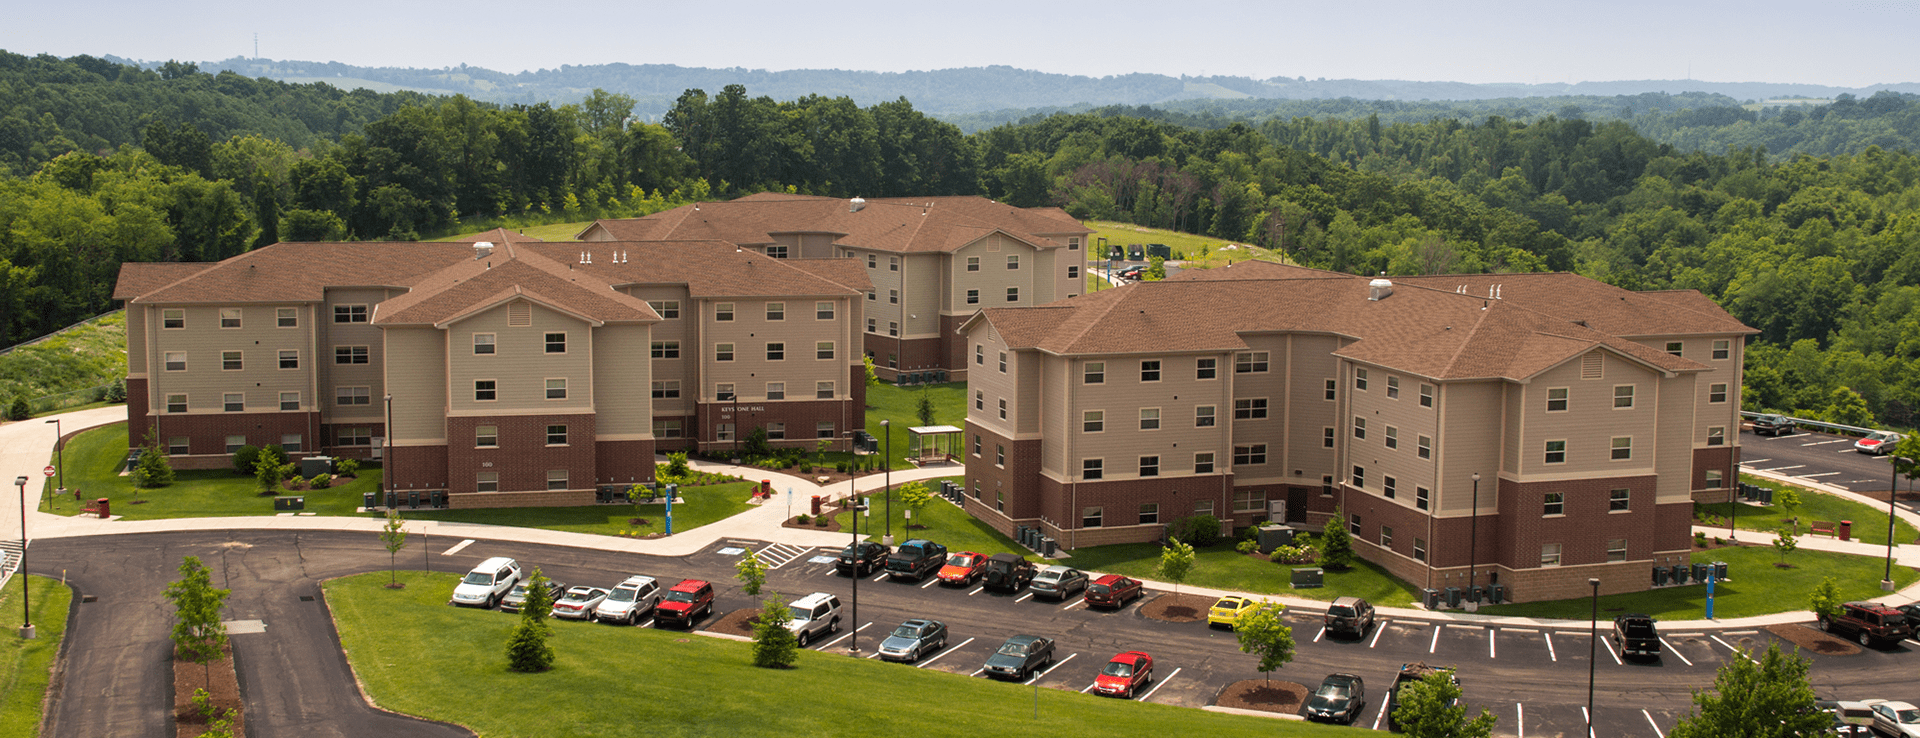 A photo of housing at  Pittsburgh Technical College.